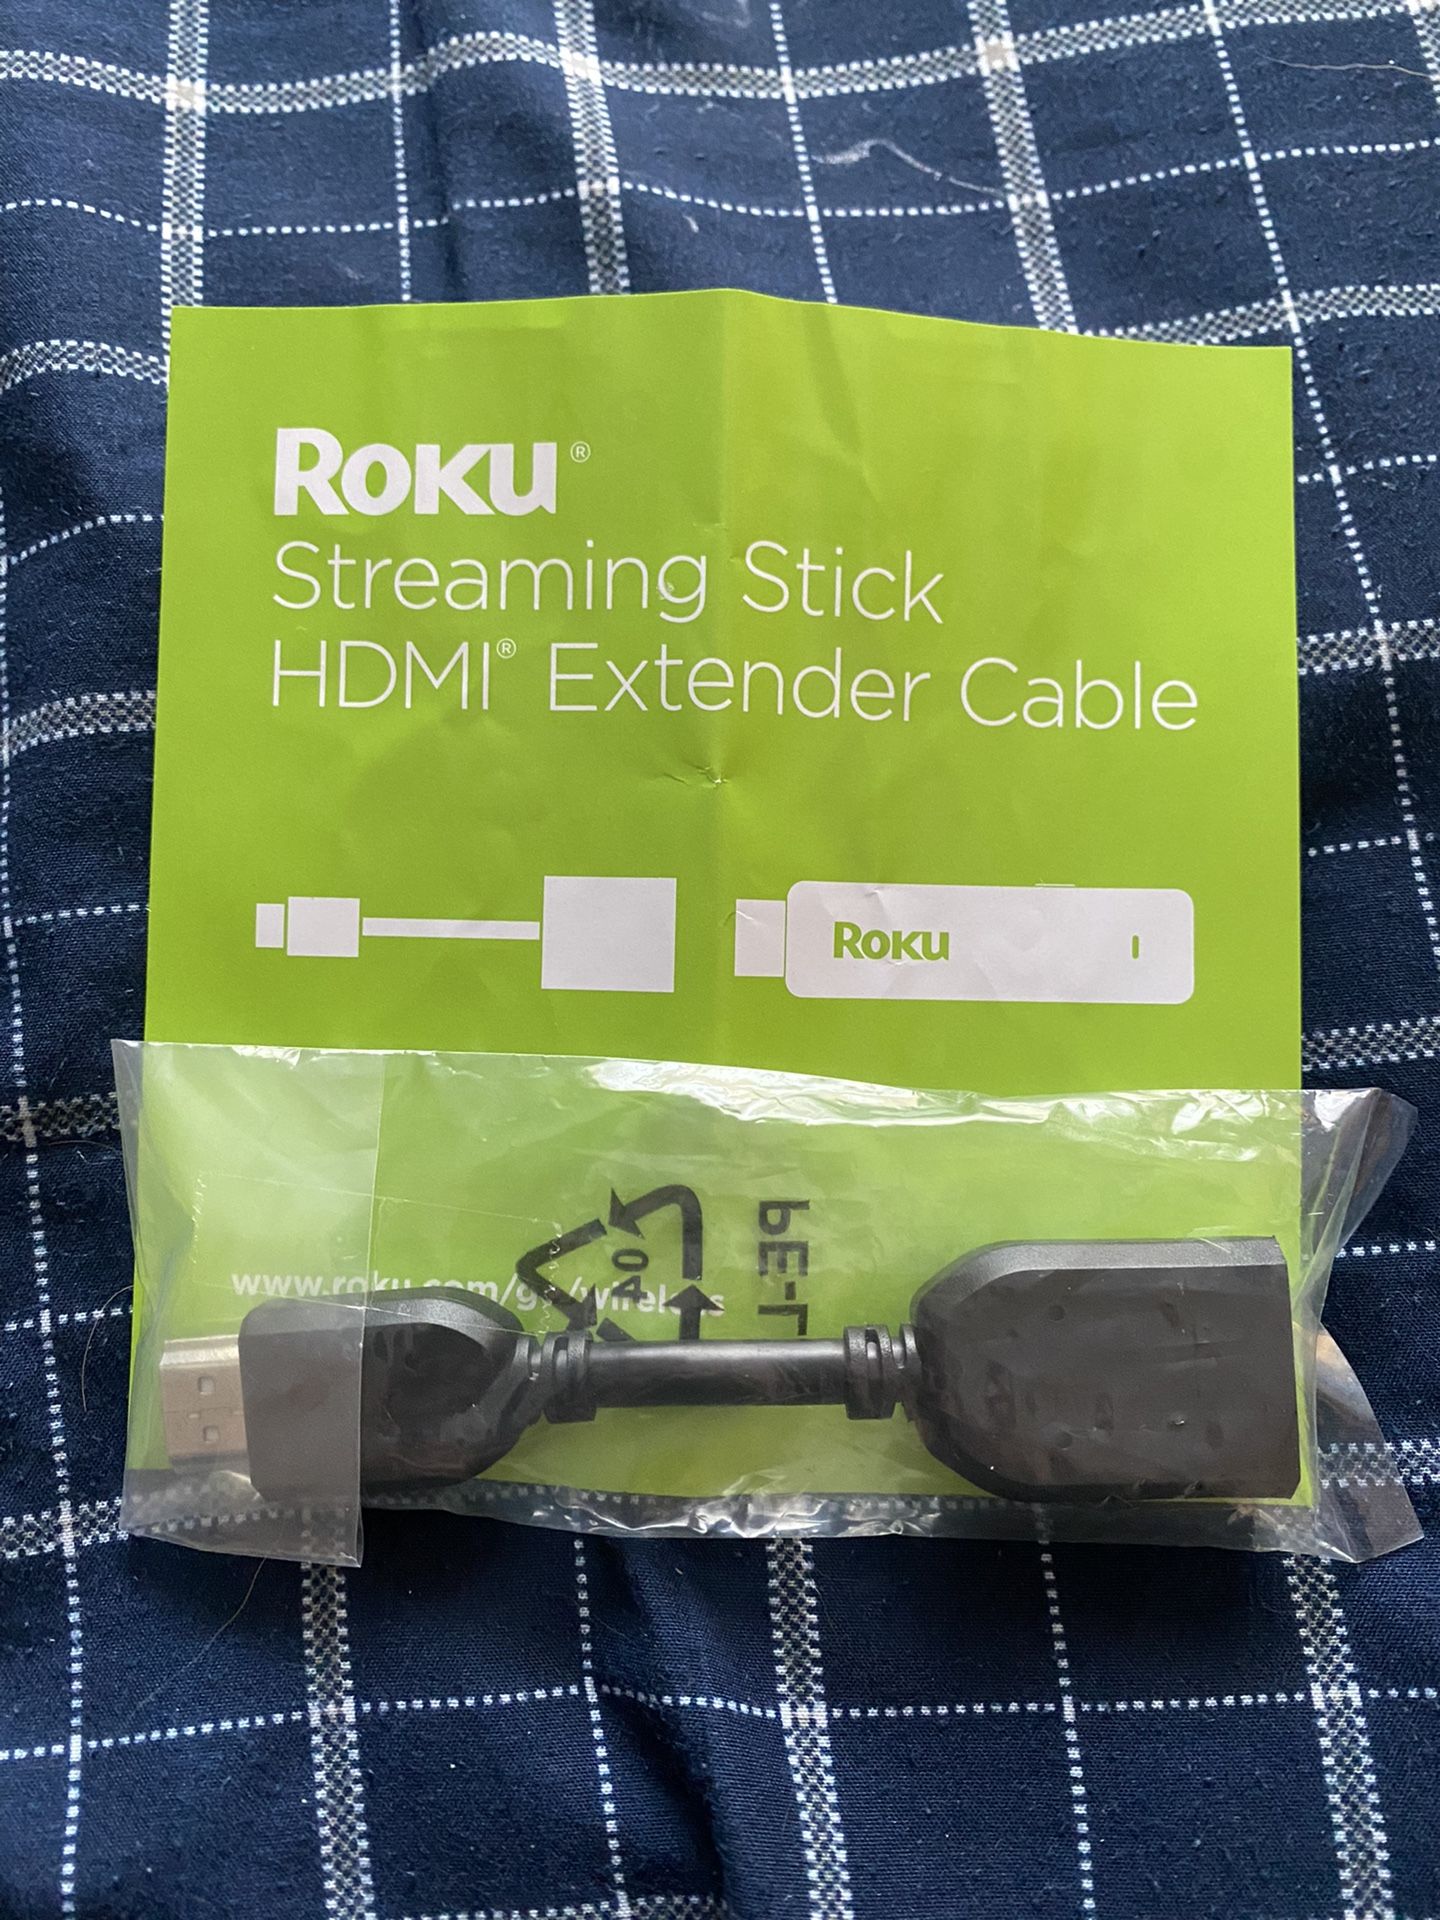 Roku Streaming Stick HDMI Extender Cable - BRAND NEW